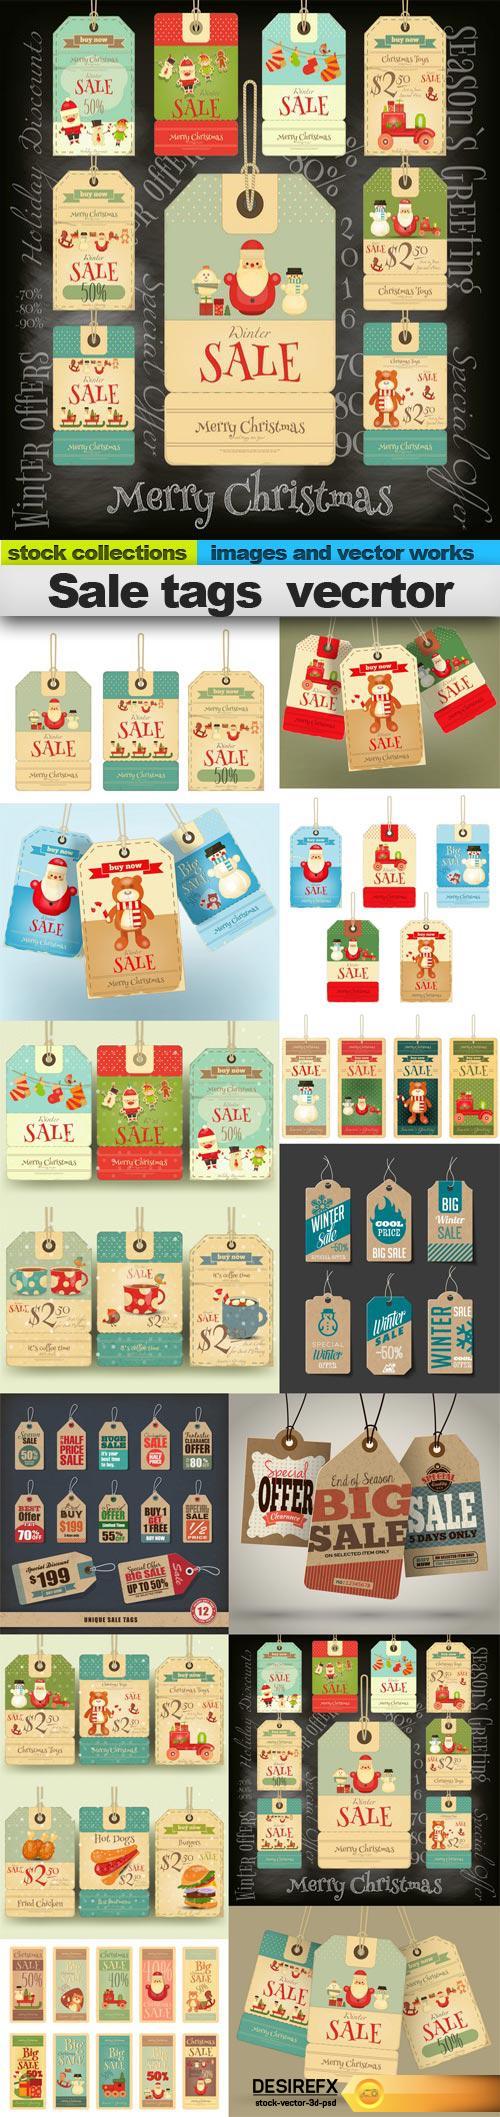 Sale tags vecrtor, 15 x EPS